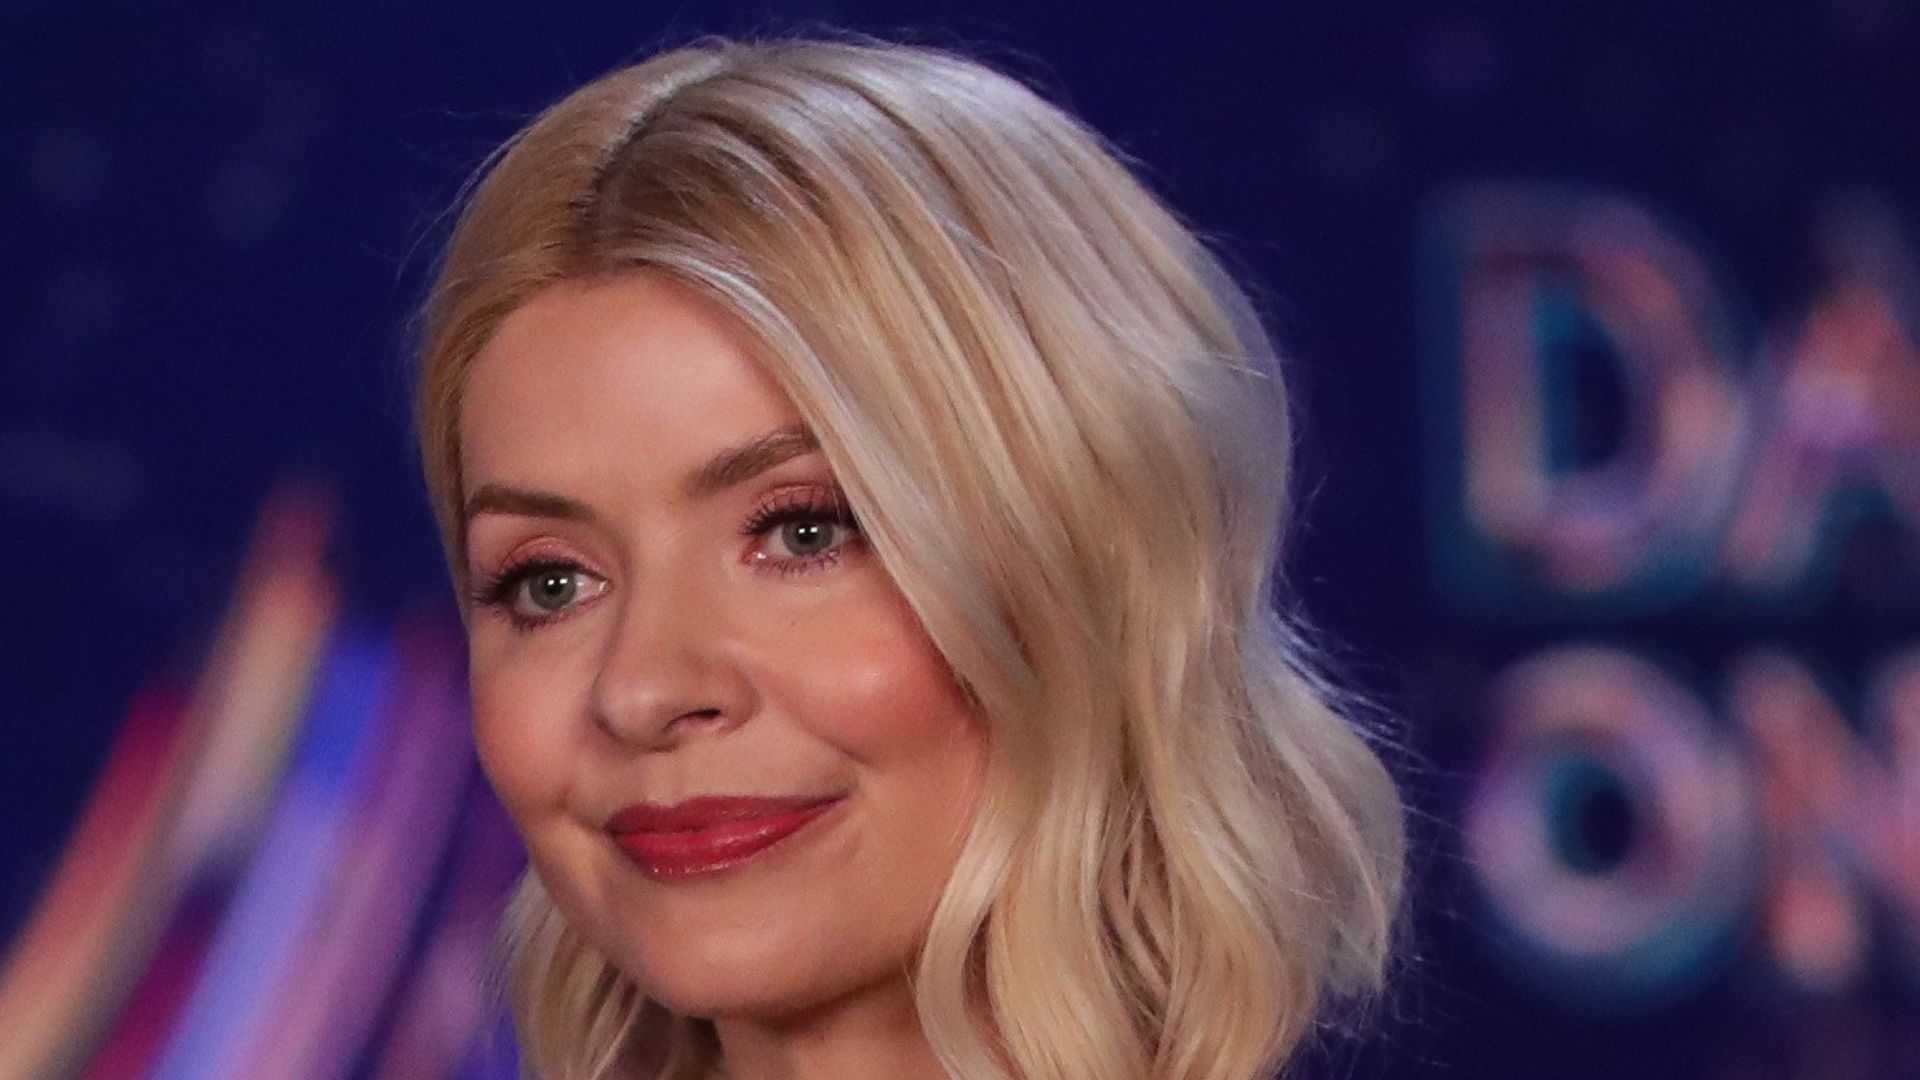 Holly Willoughby with blank expression